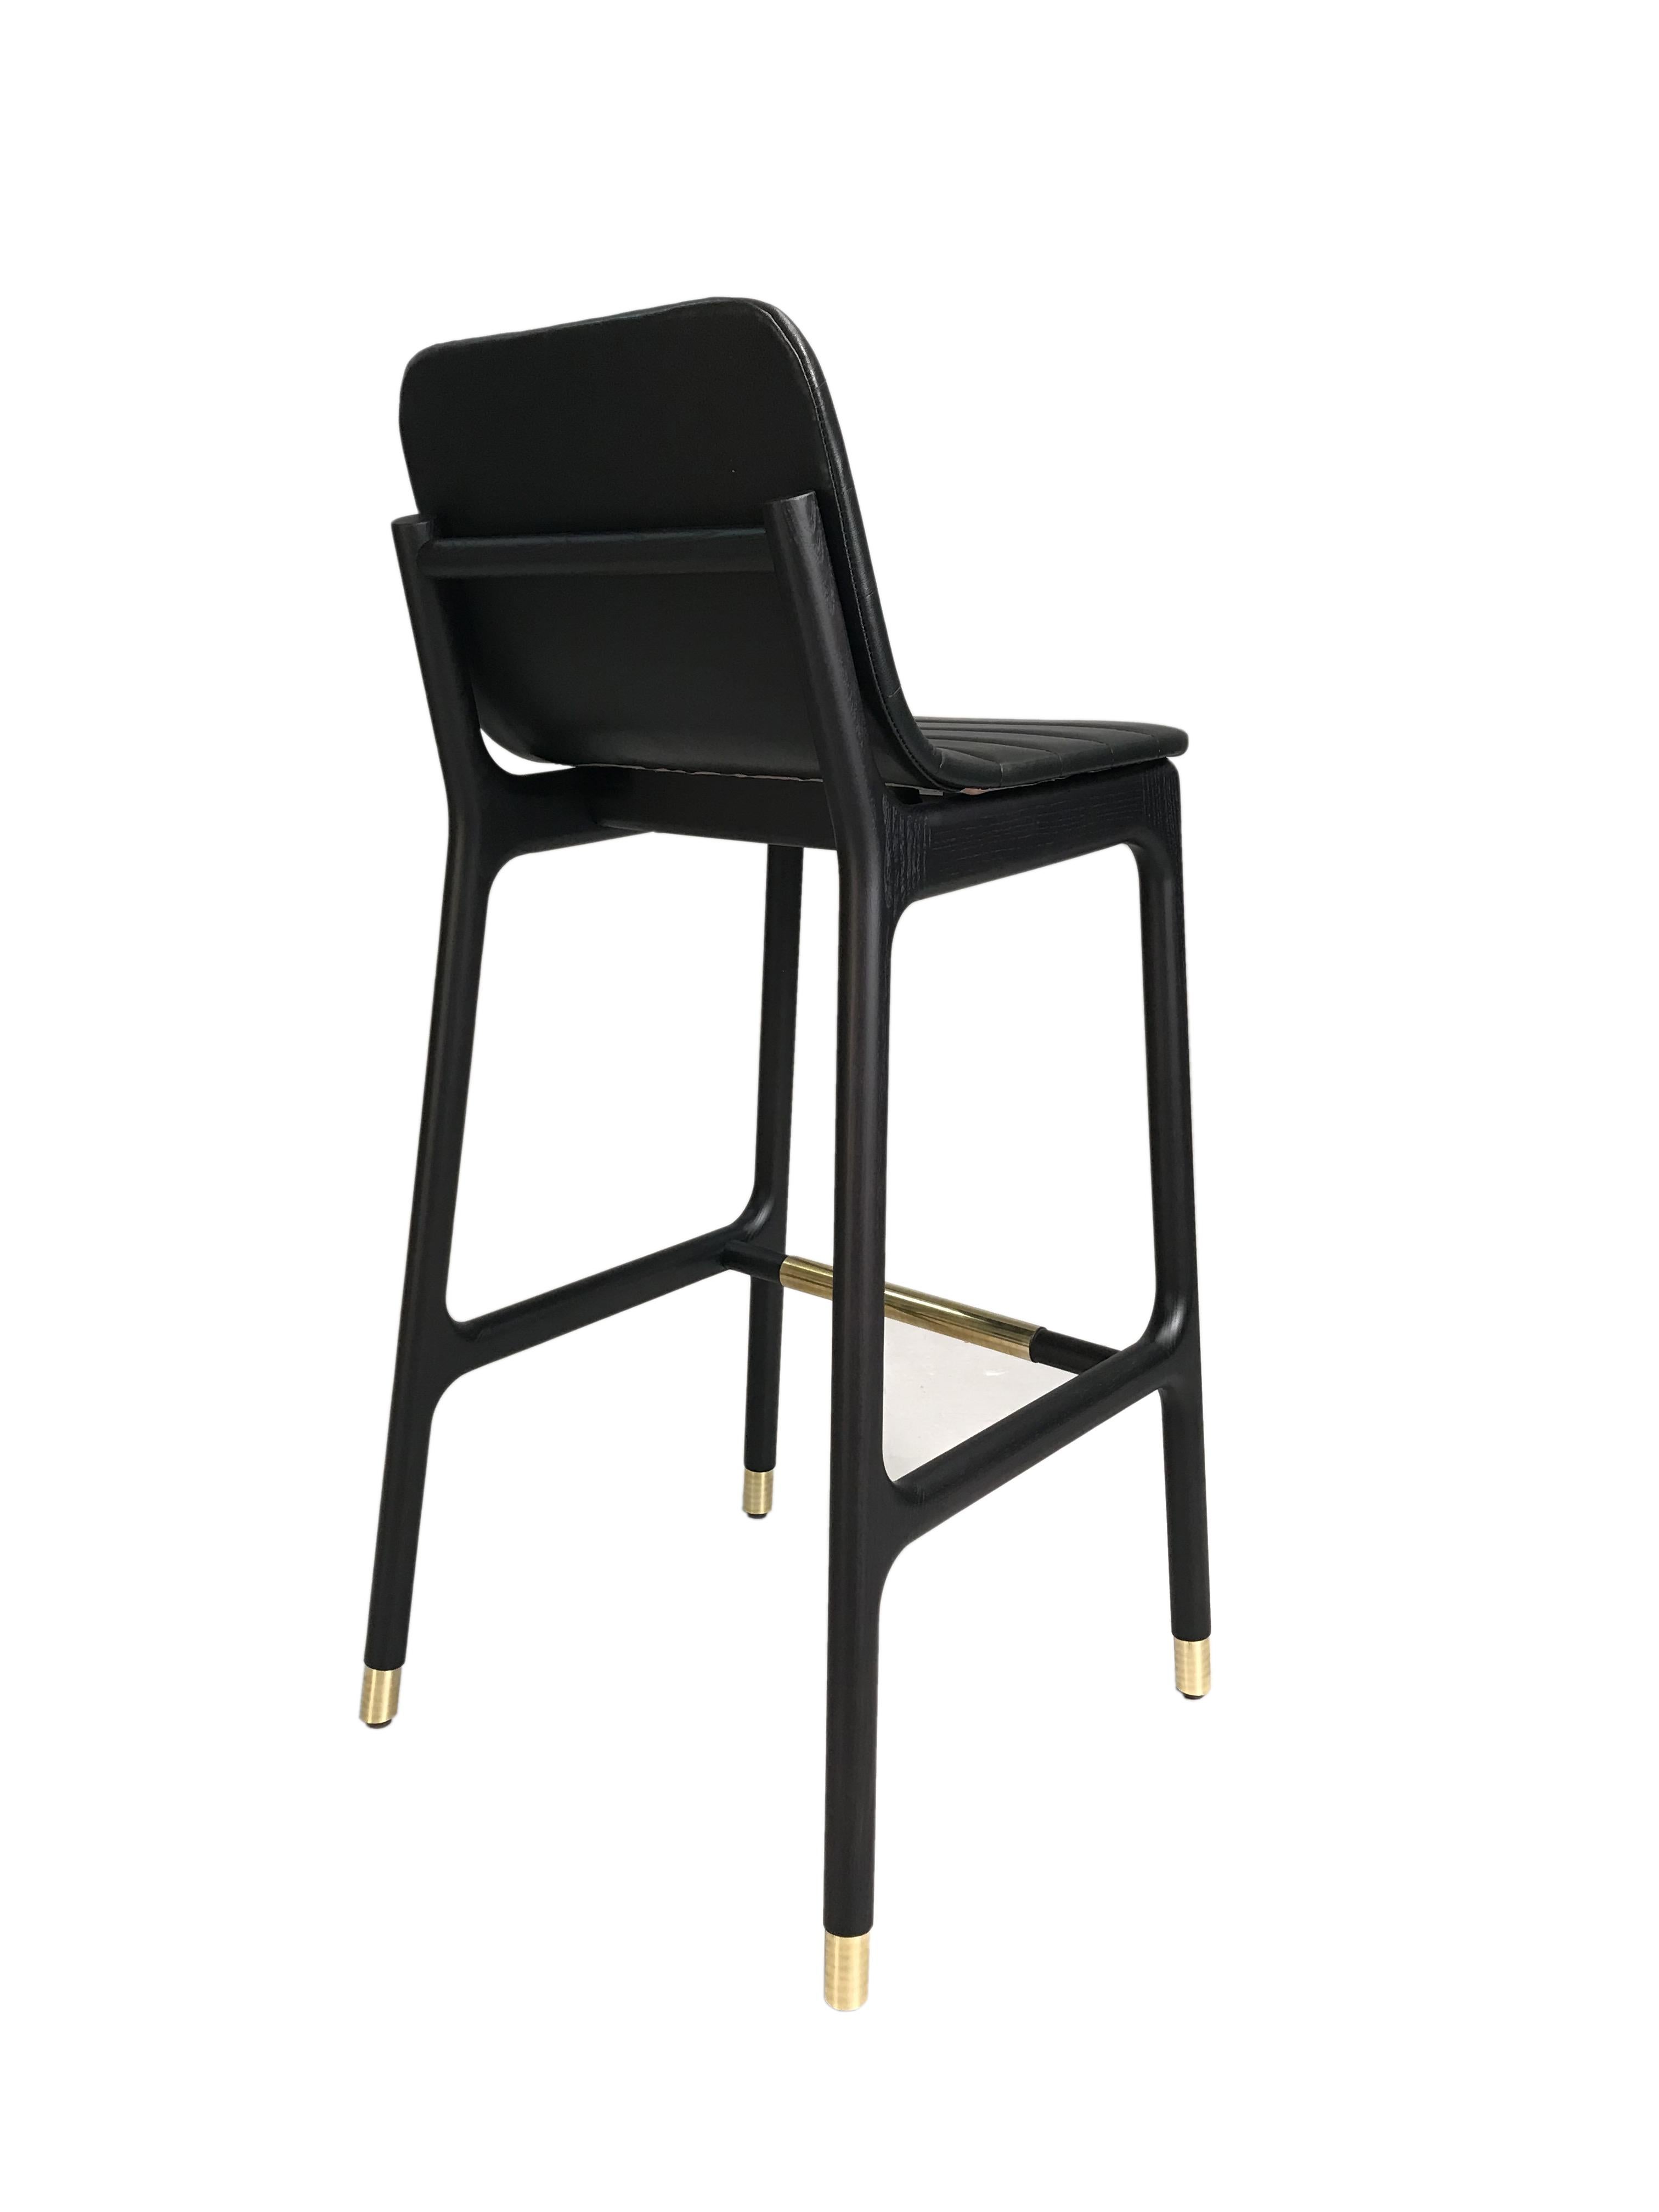 Brass Morelato - Joyce Contemporary Stool in Ashwood and Leather